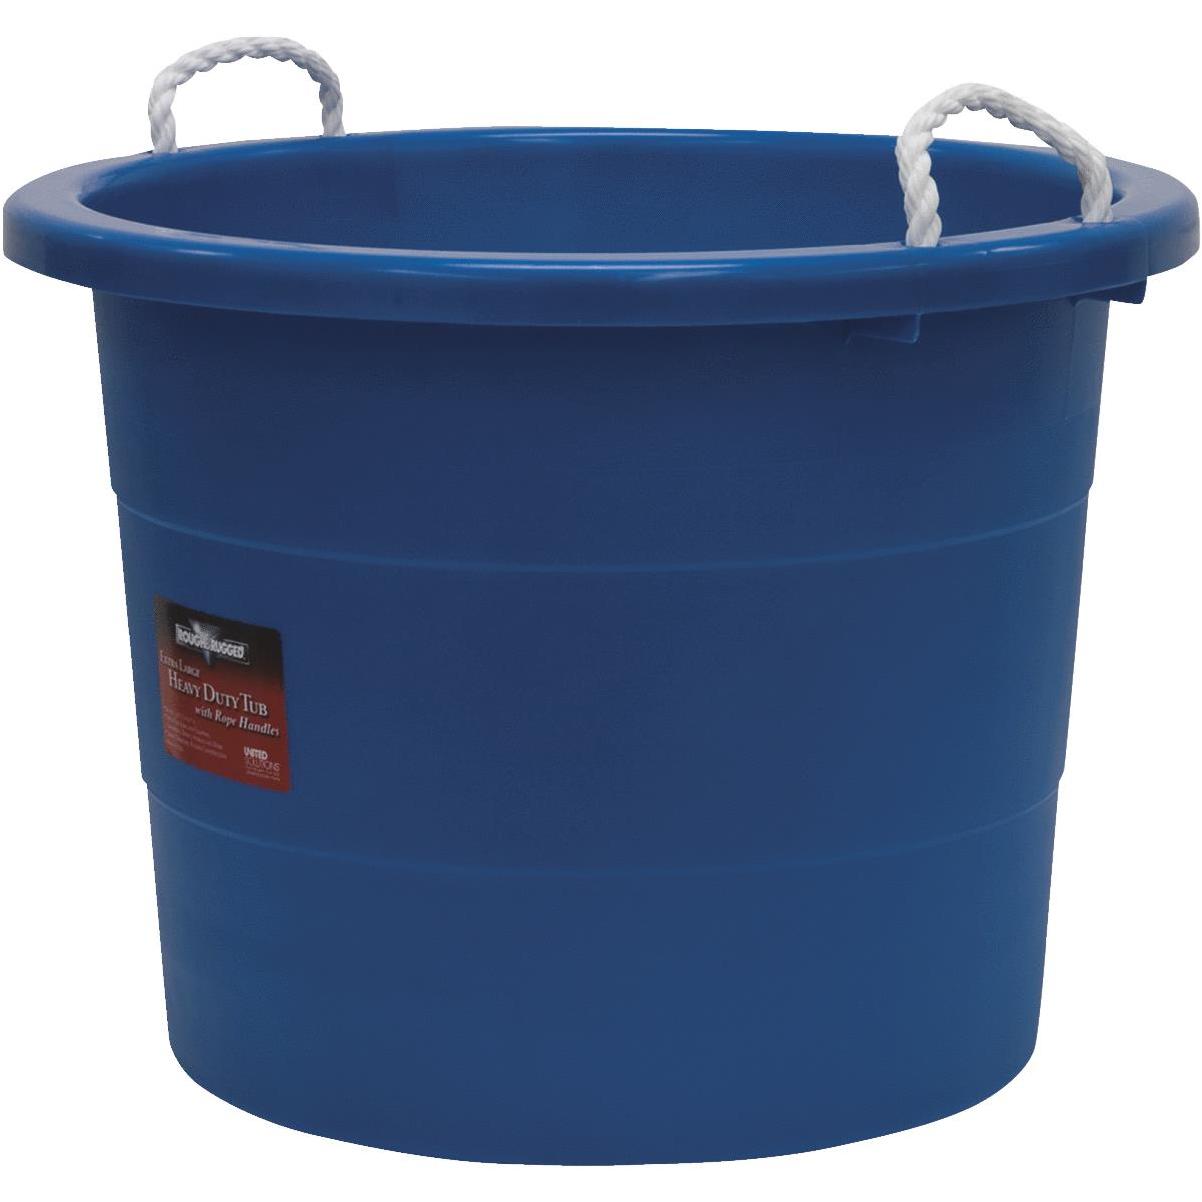 Homz Plastic 18 Gallon Utility Bucket Tub Container with Handles